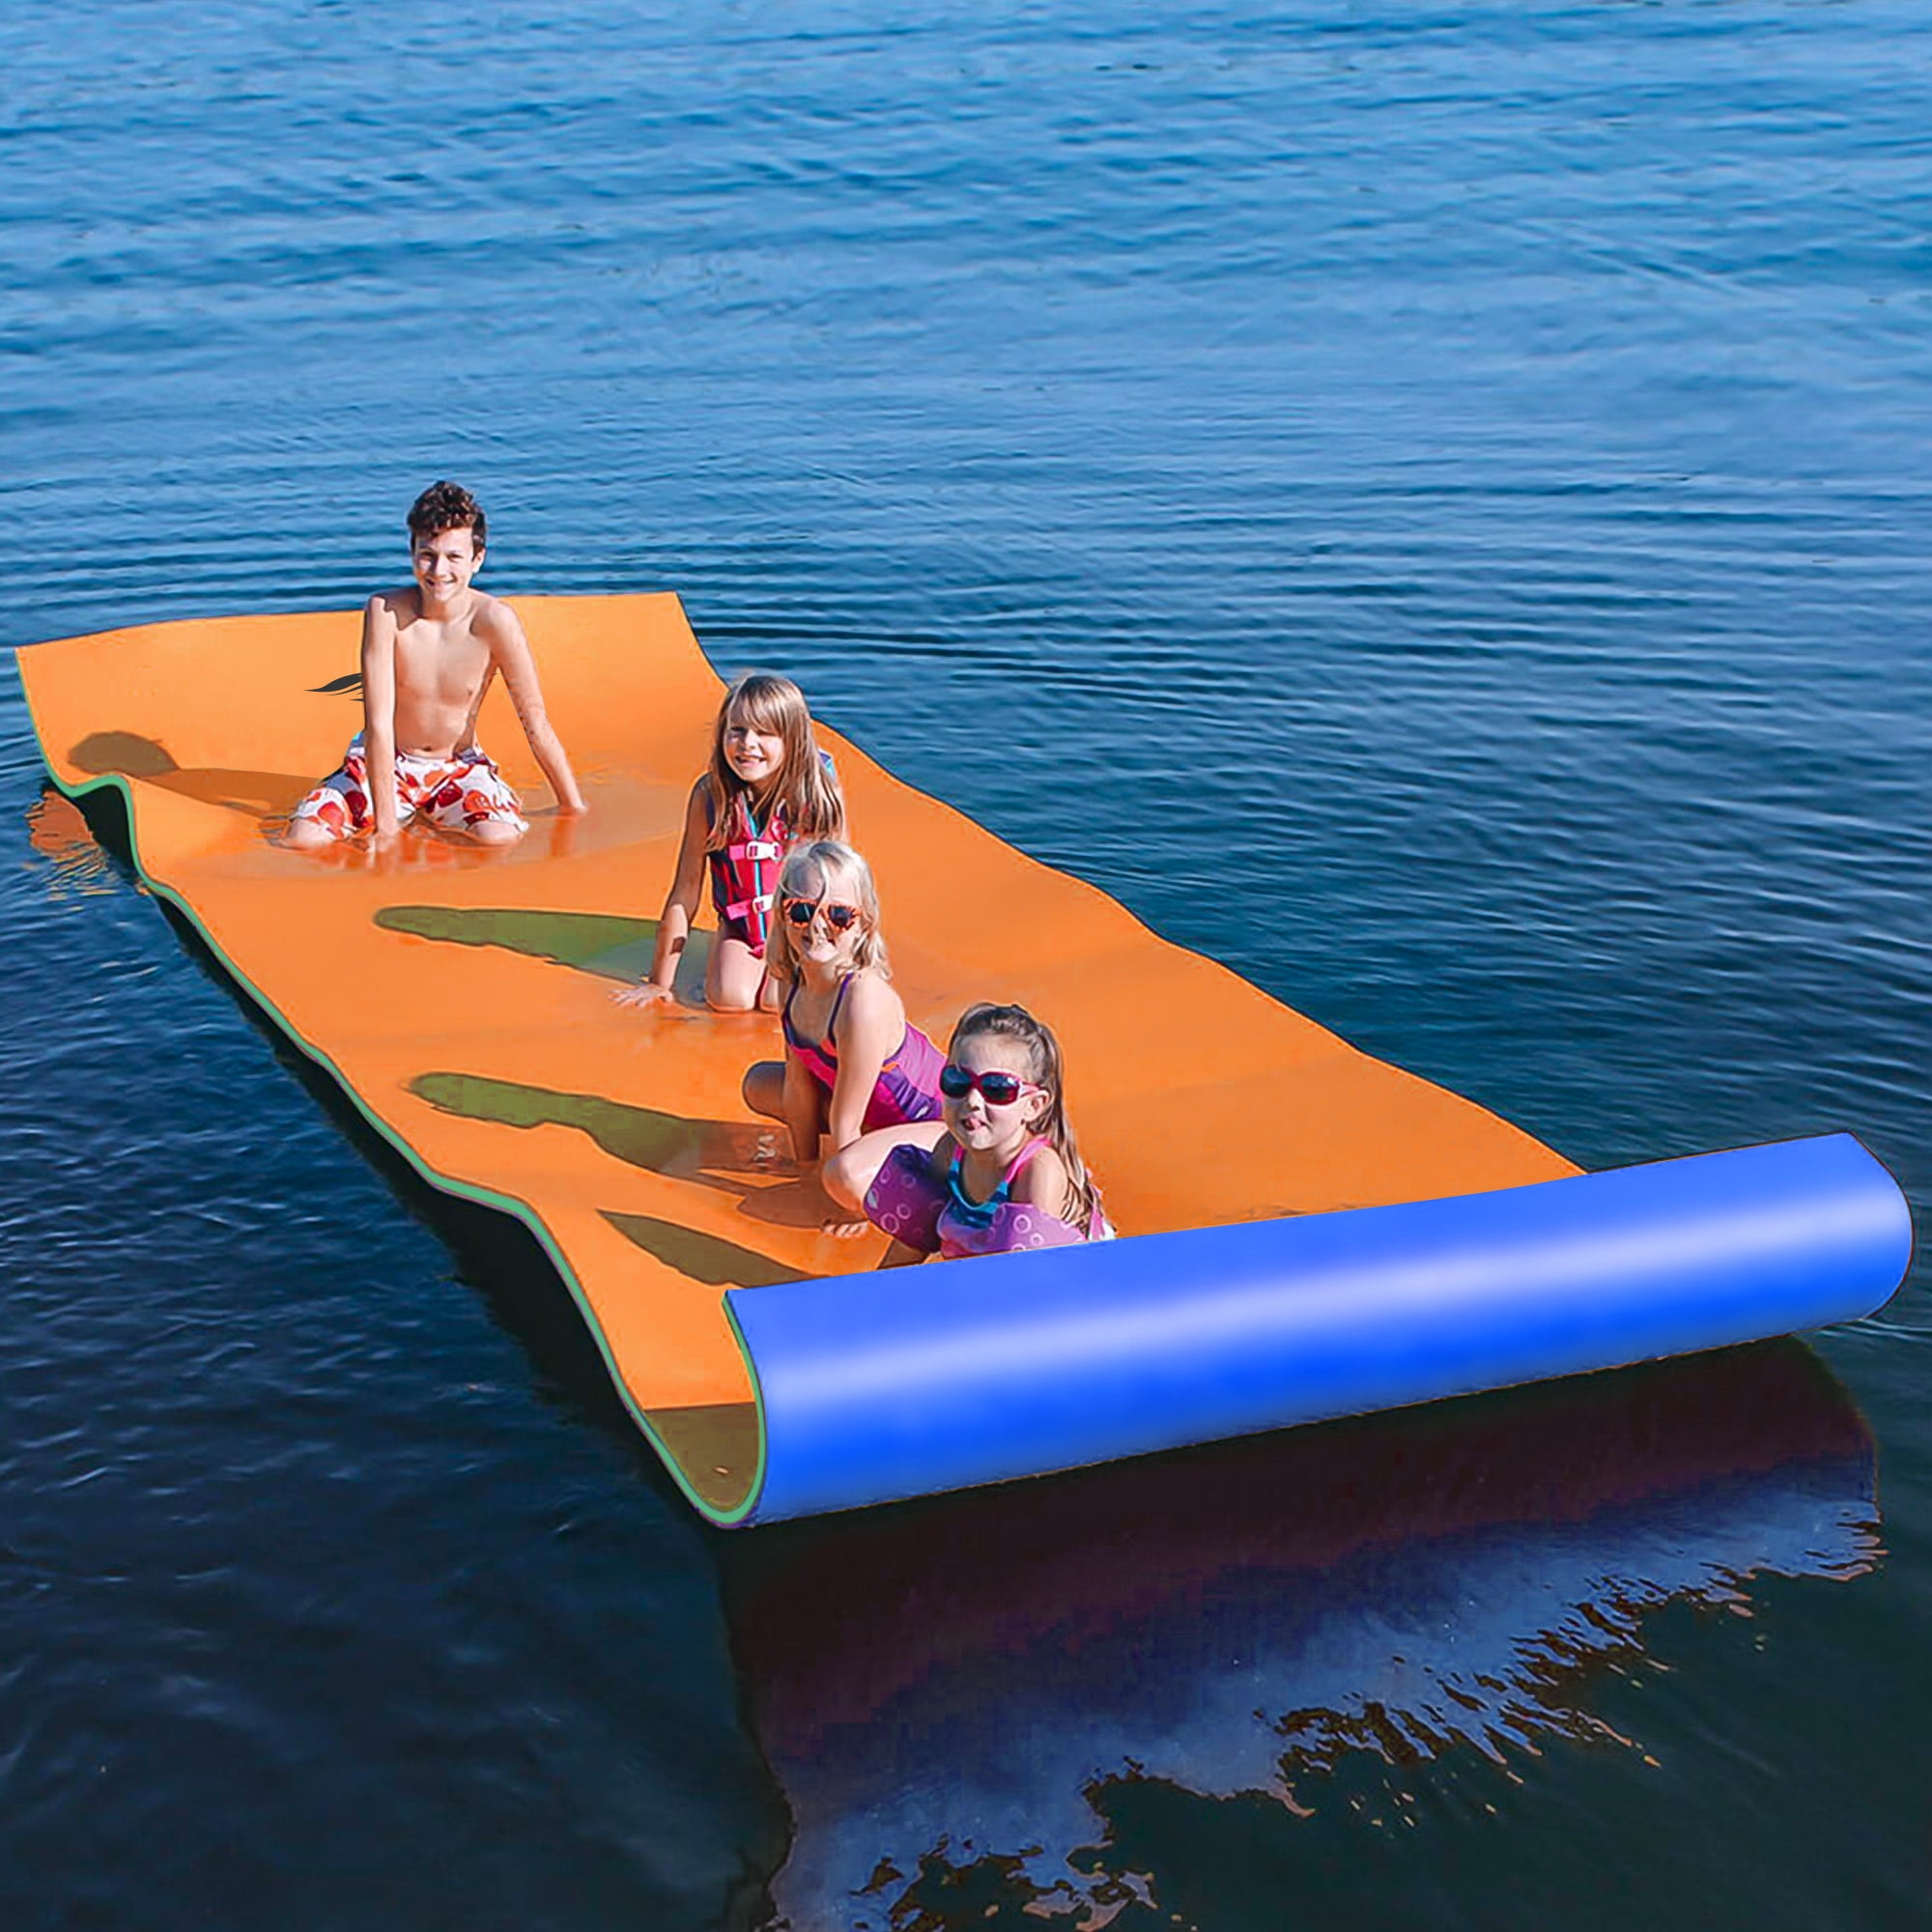 KOFUN Floating Mat for Lake, 3-Layer Lake Floats Lily Pad, Water Pad with  Storage Straps for Kids Adults Outdoor Water Activities, 12 x 6 FT, Orange